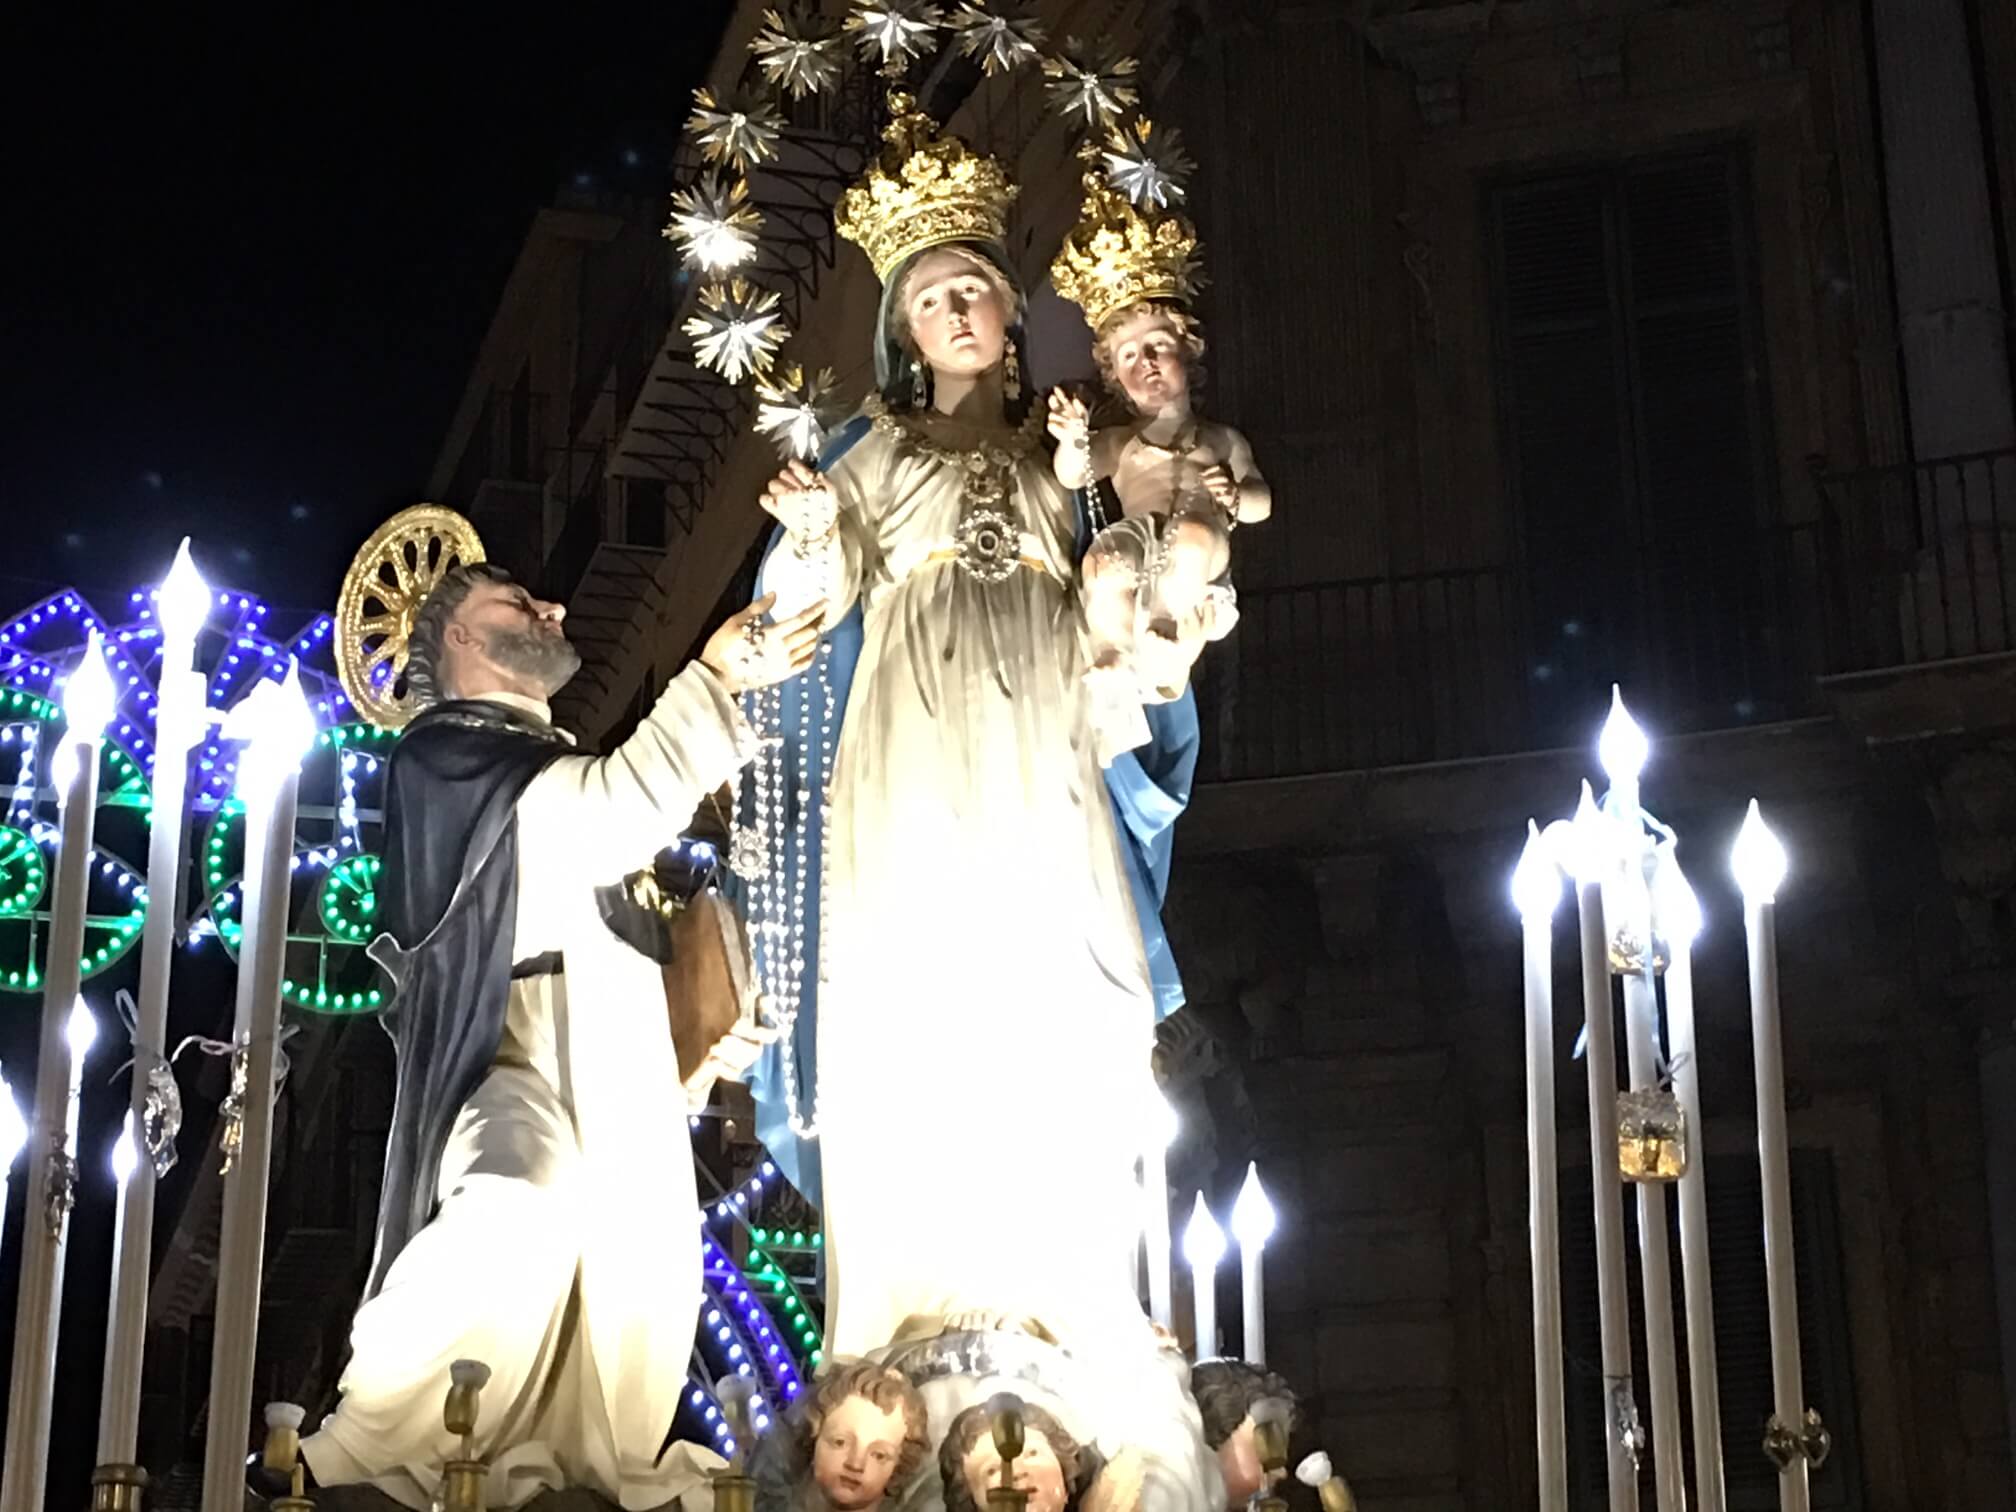 Religious procession in southern Italy